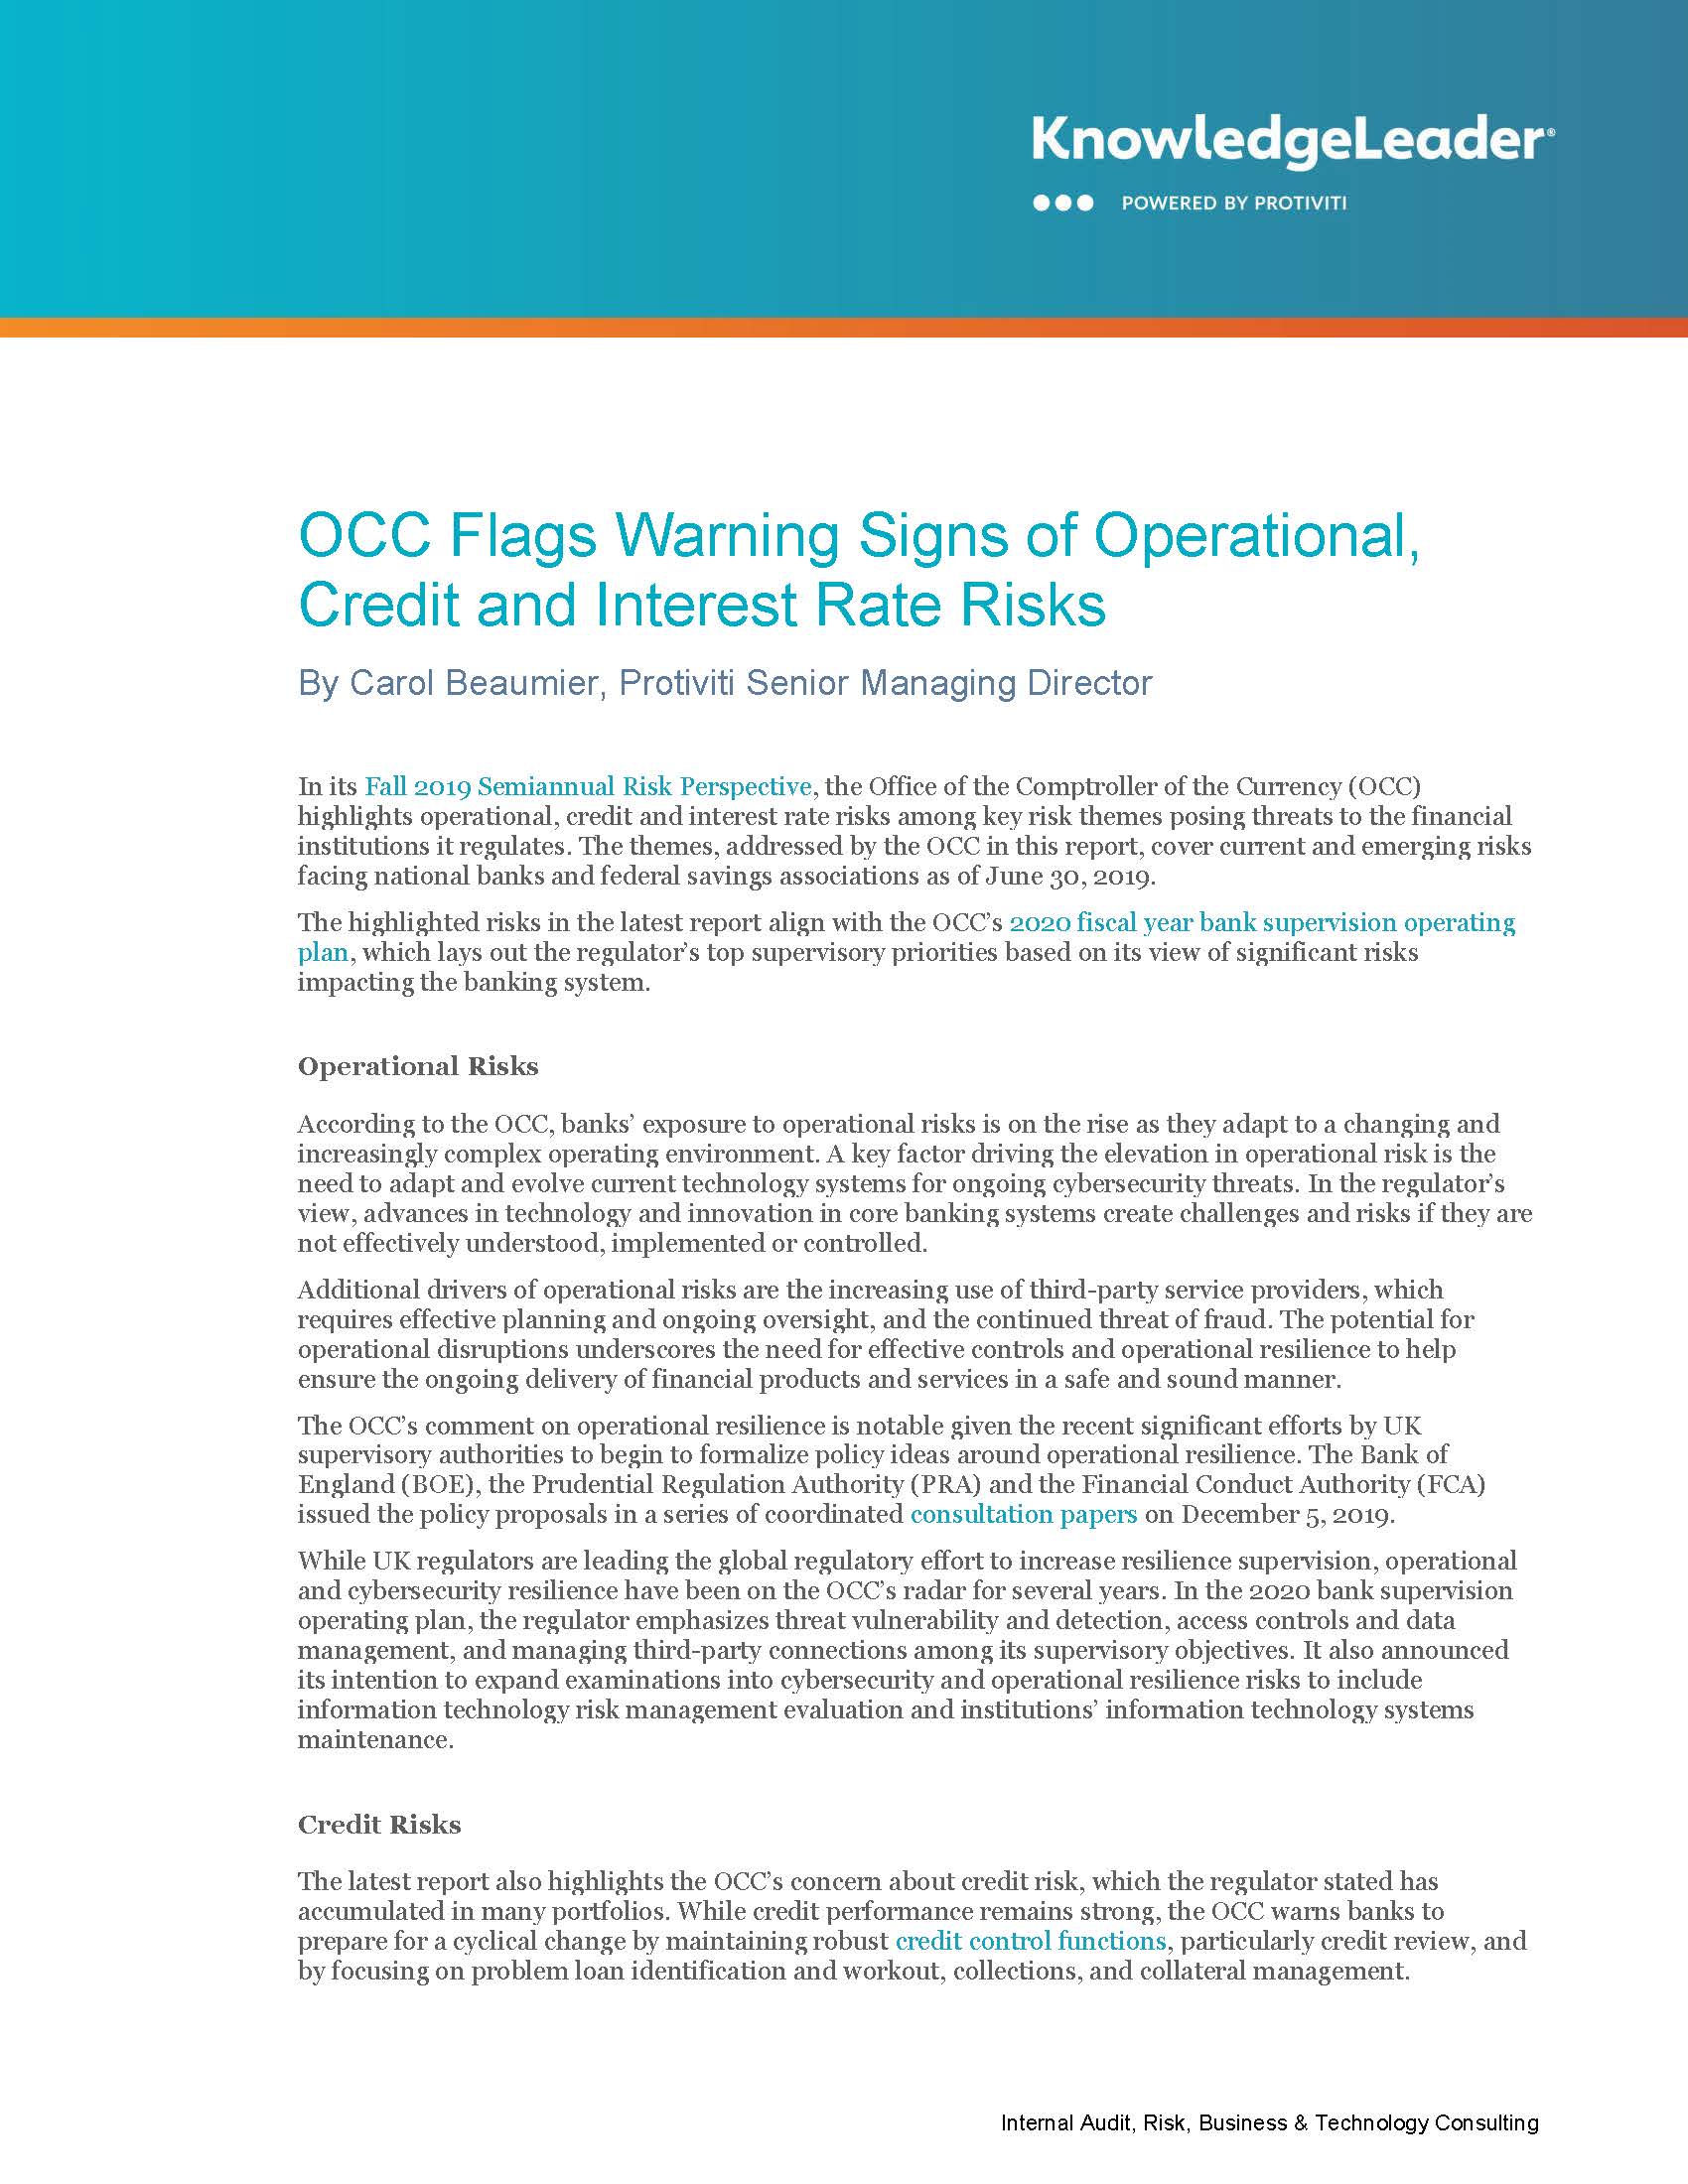 Screenshot of the first page of OCC Flags Warning Signs of Operational Credit and Interest Rate Risks